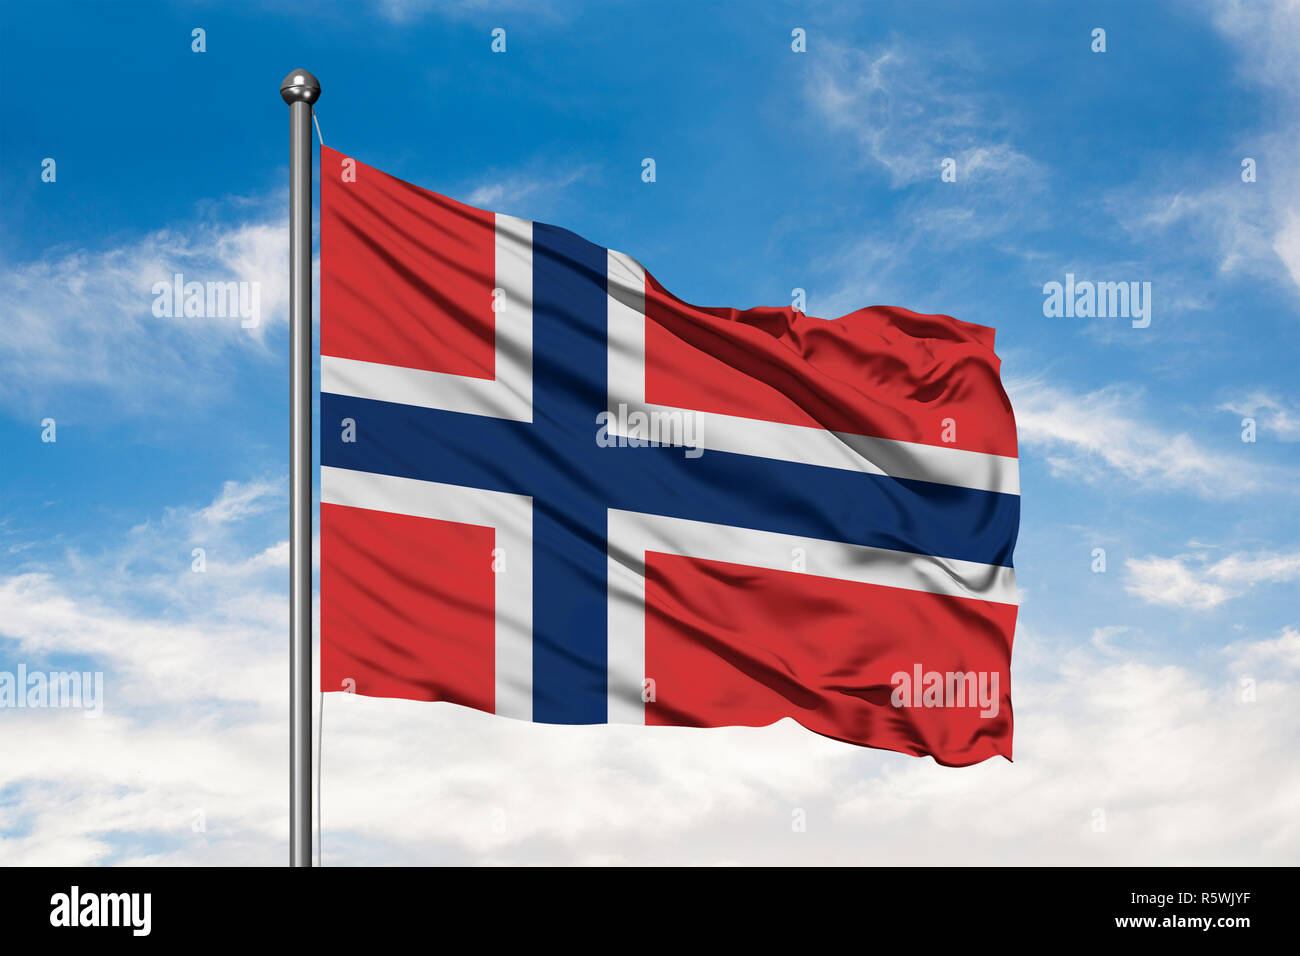 Flag Of Norway Waving In The Wind Against White Cloudy Blue Sky Norwegian Flag Stock Photo Alamy